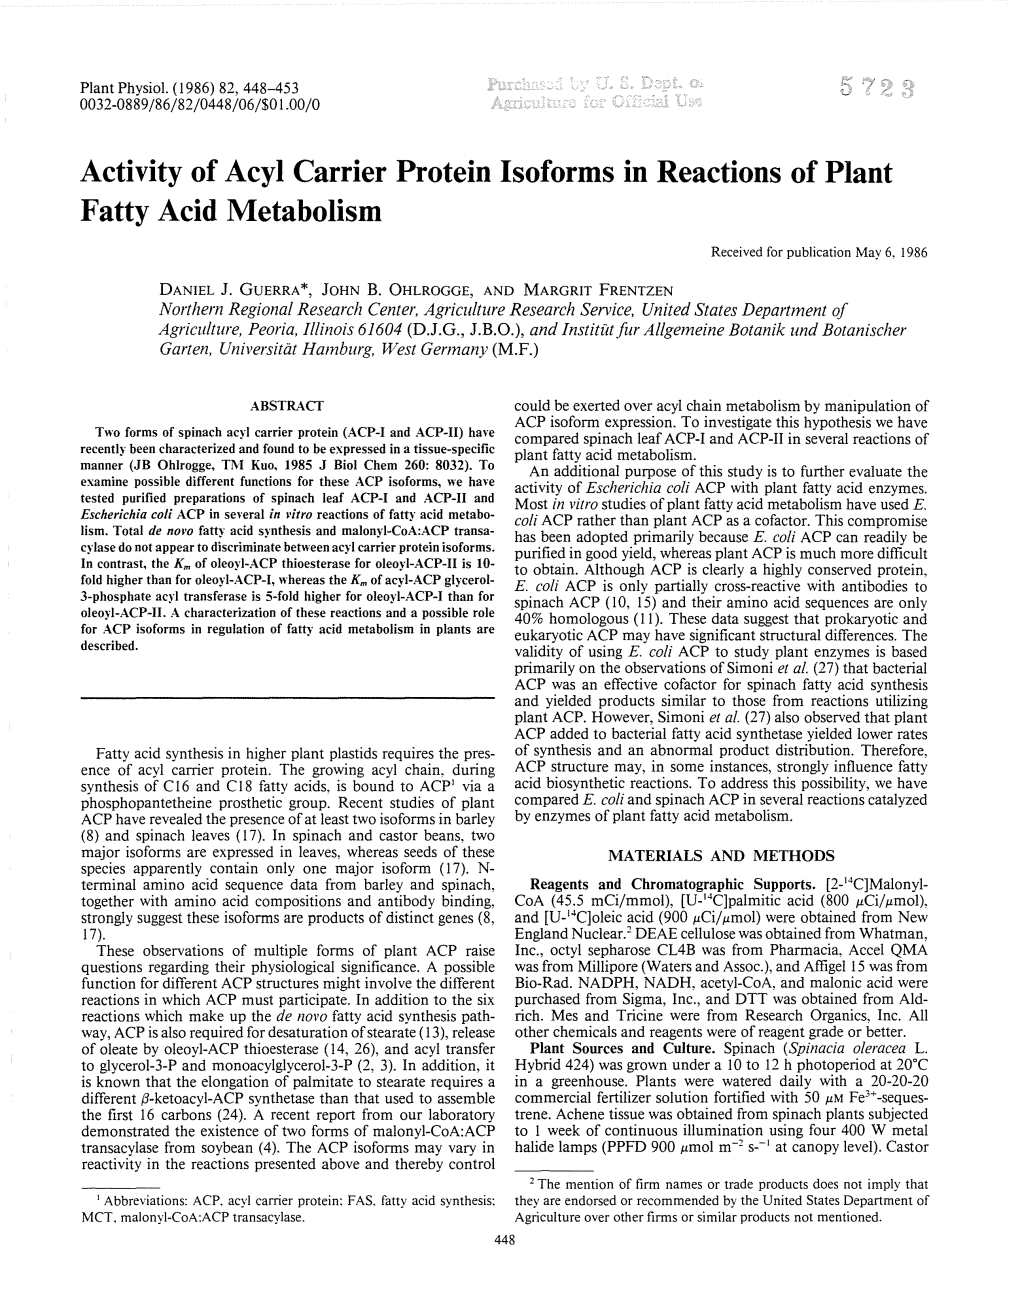 Activity of Acyl Carrier Protein Isoforms in Reactions of Plant Fatty Acid Metabolism